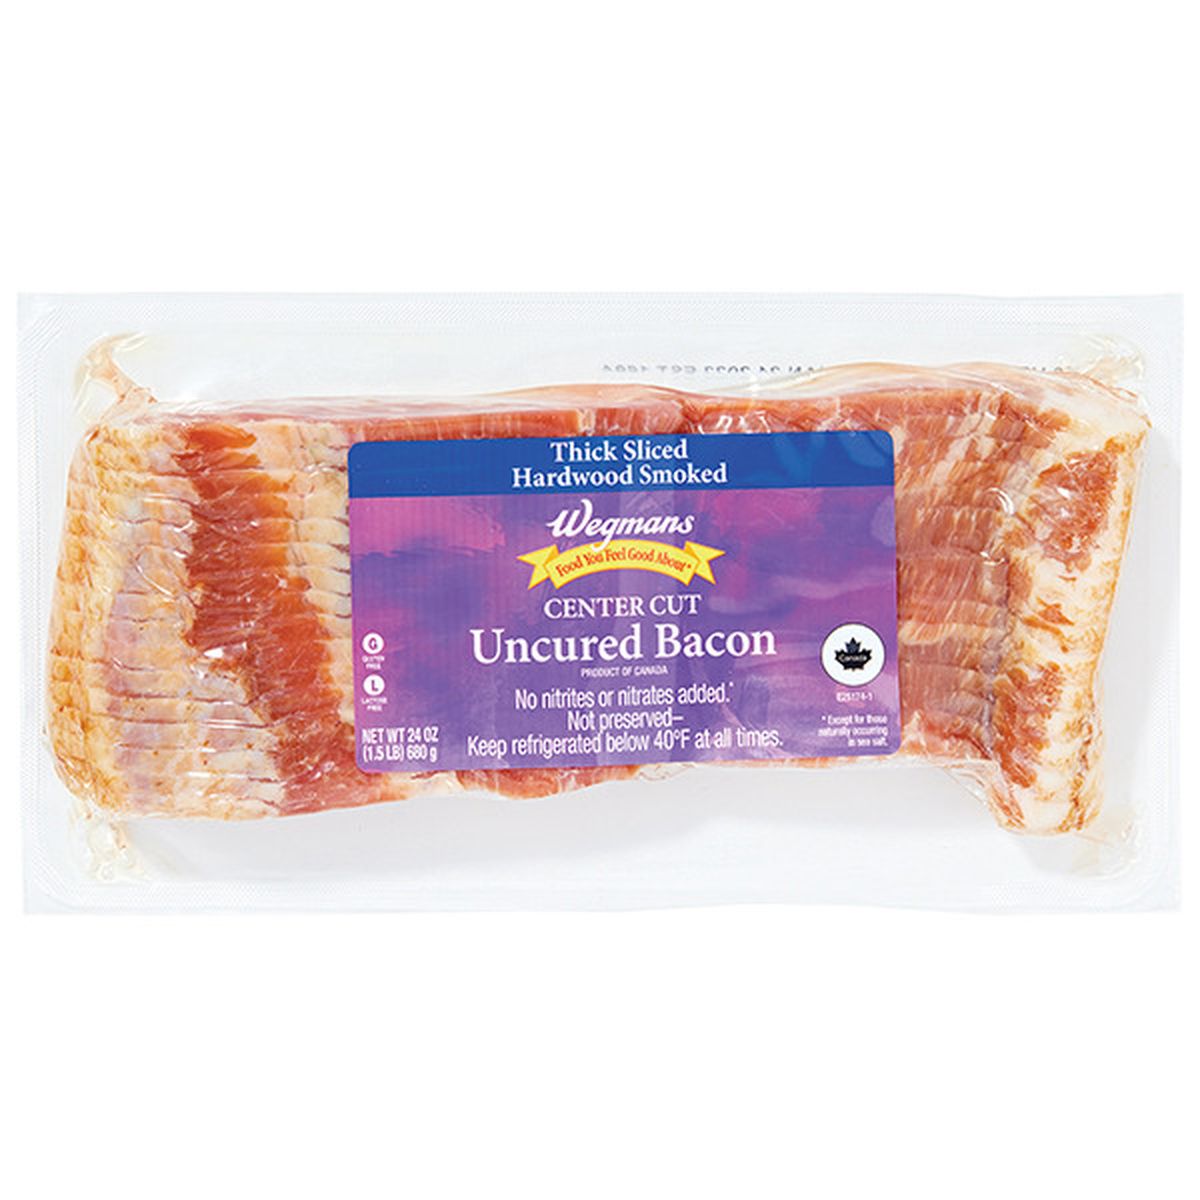 Calories in Wegmans Thick Sliced Hardwood Smoked Center Cut Uncured Bacon